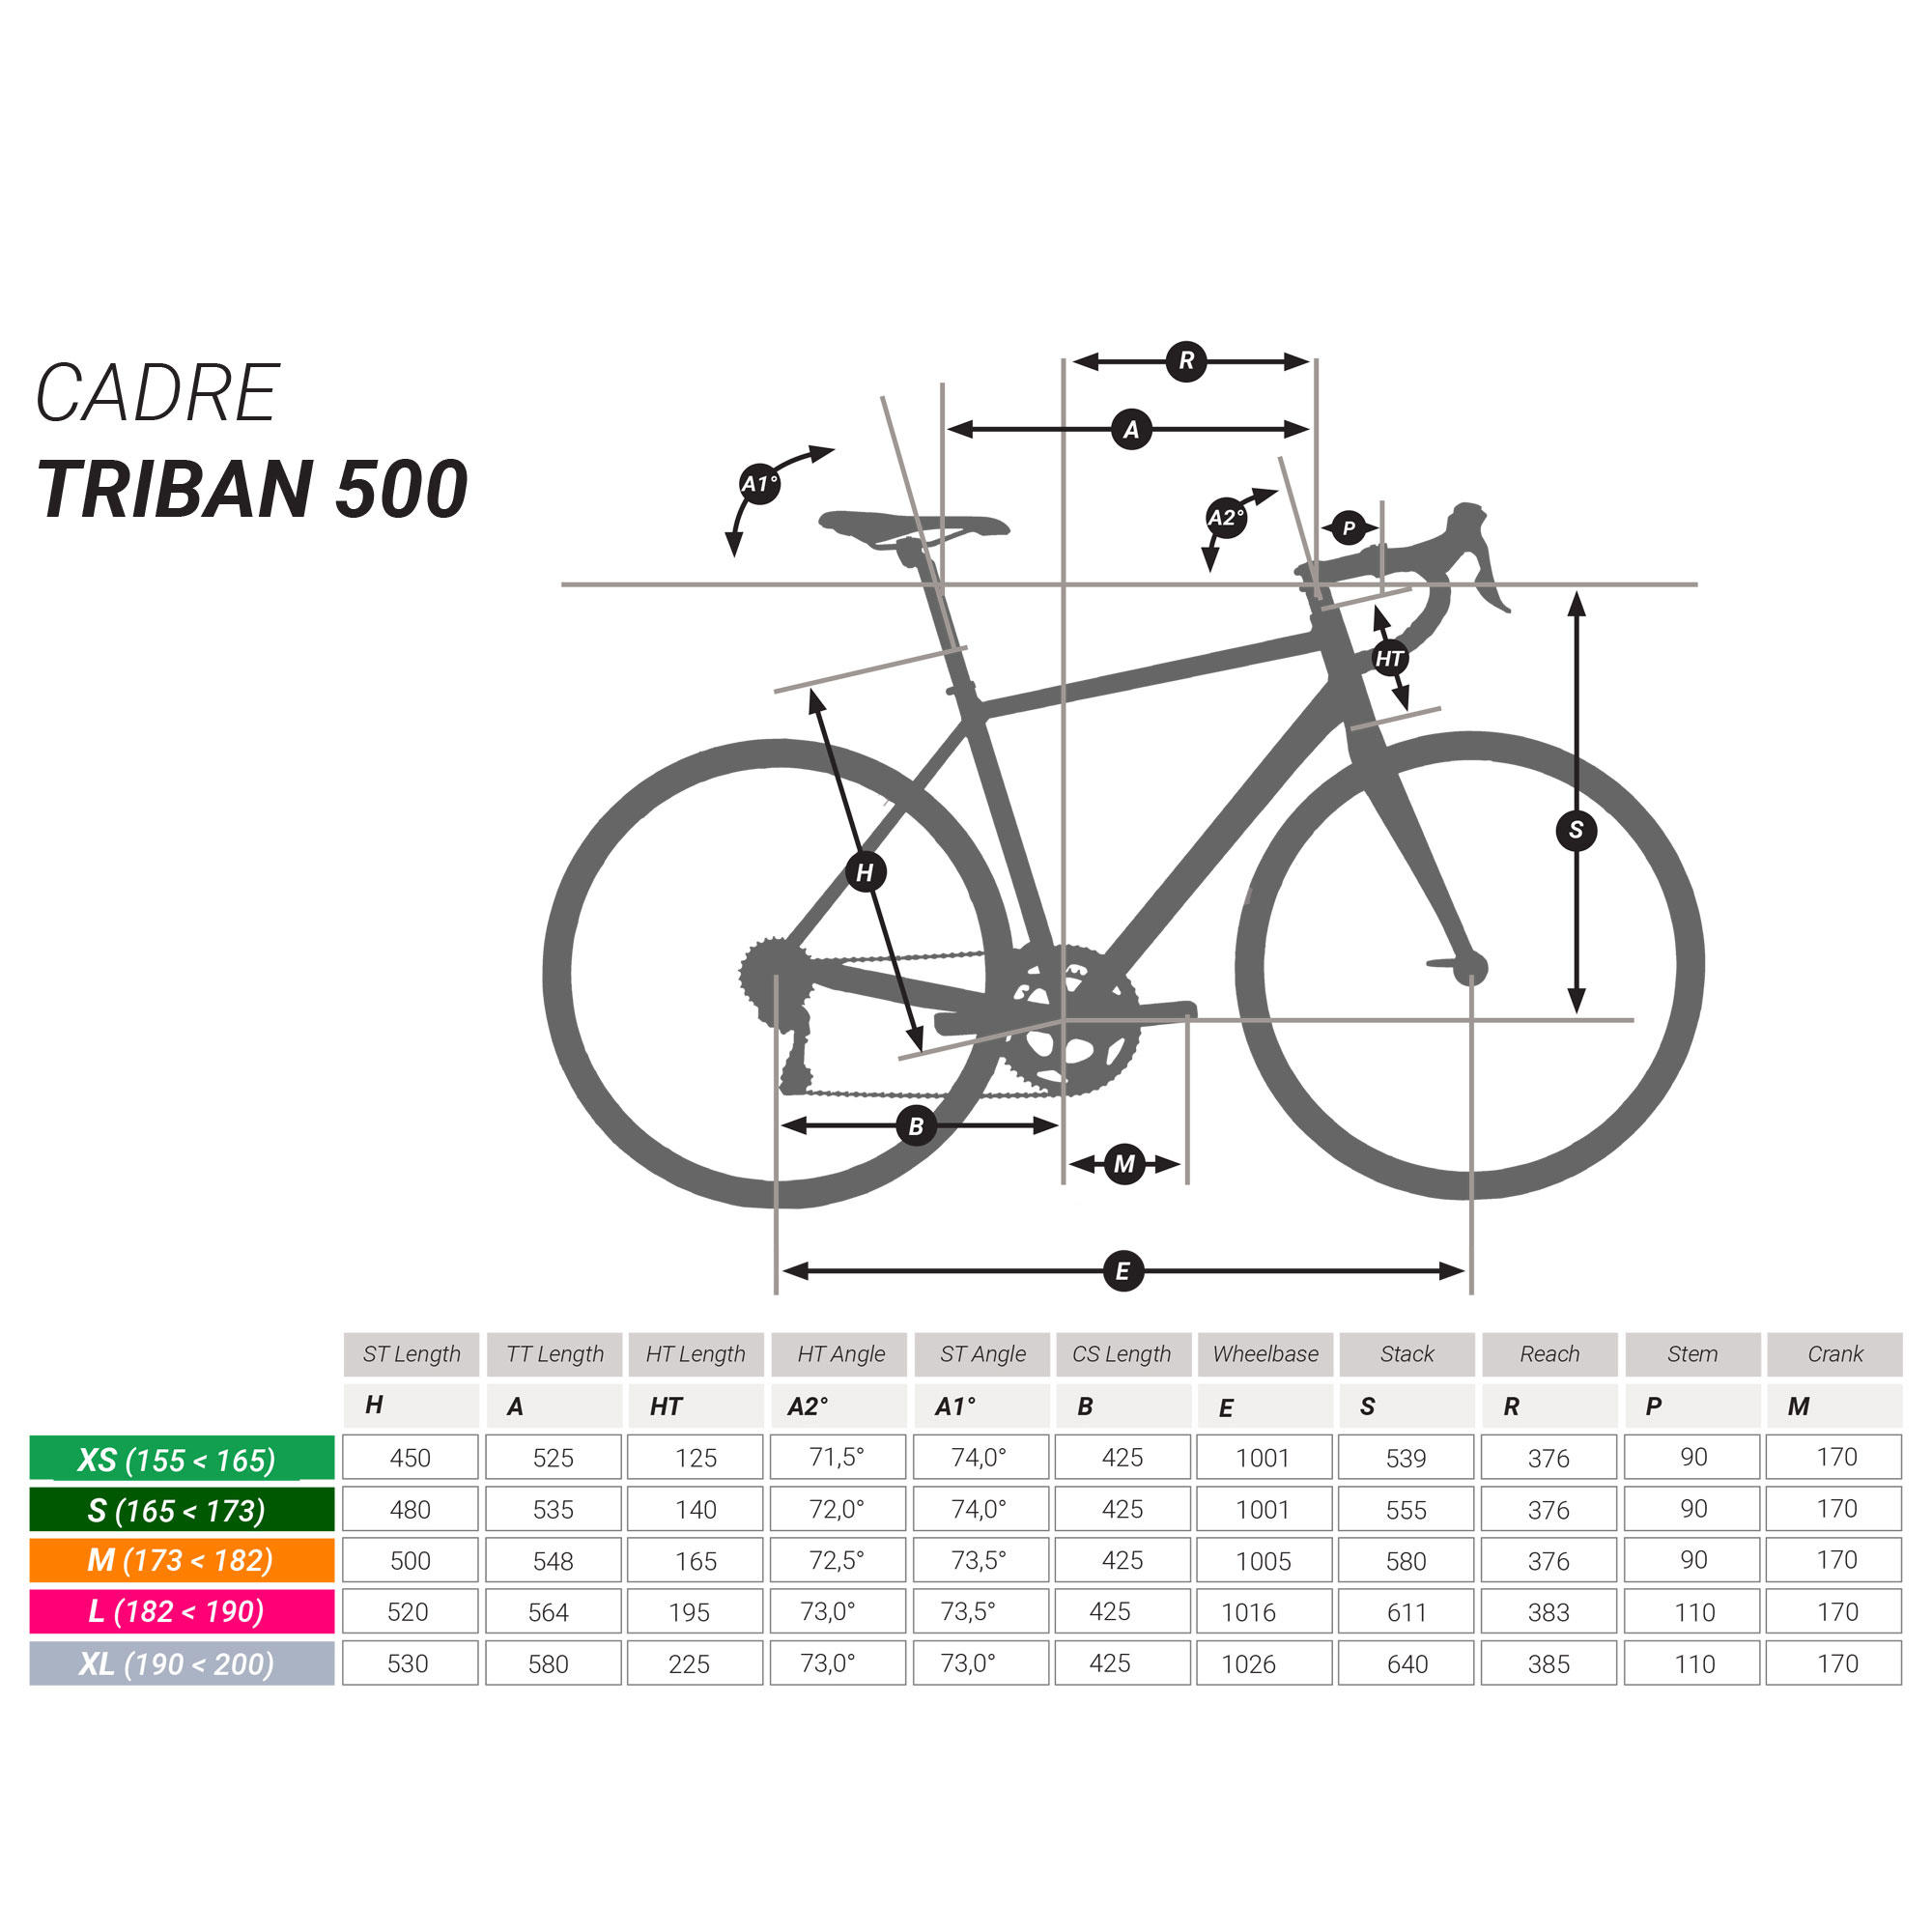 btwin triban 500 frame size